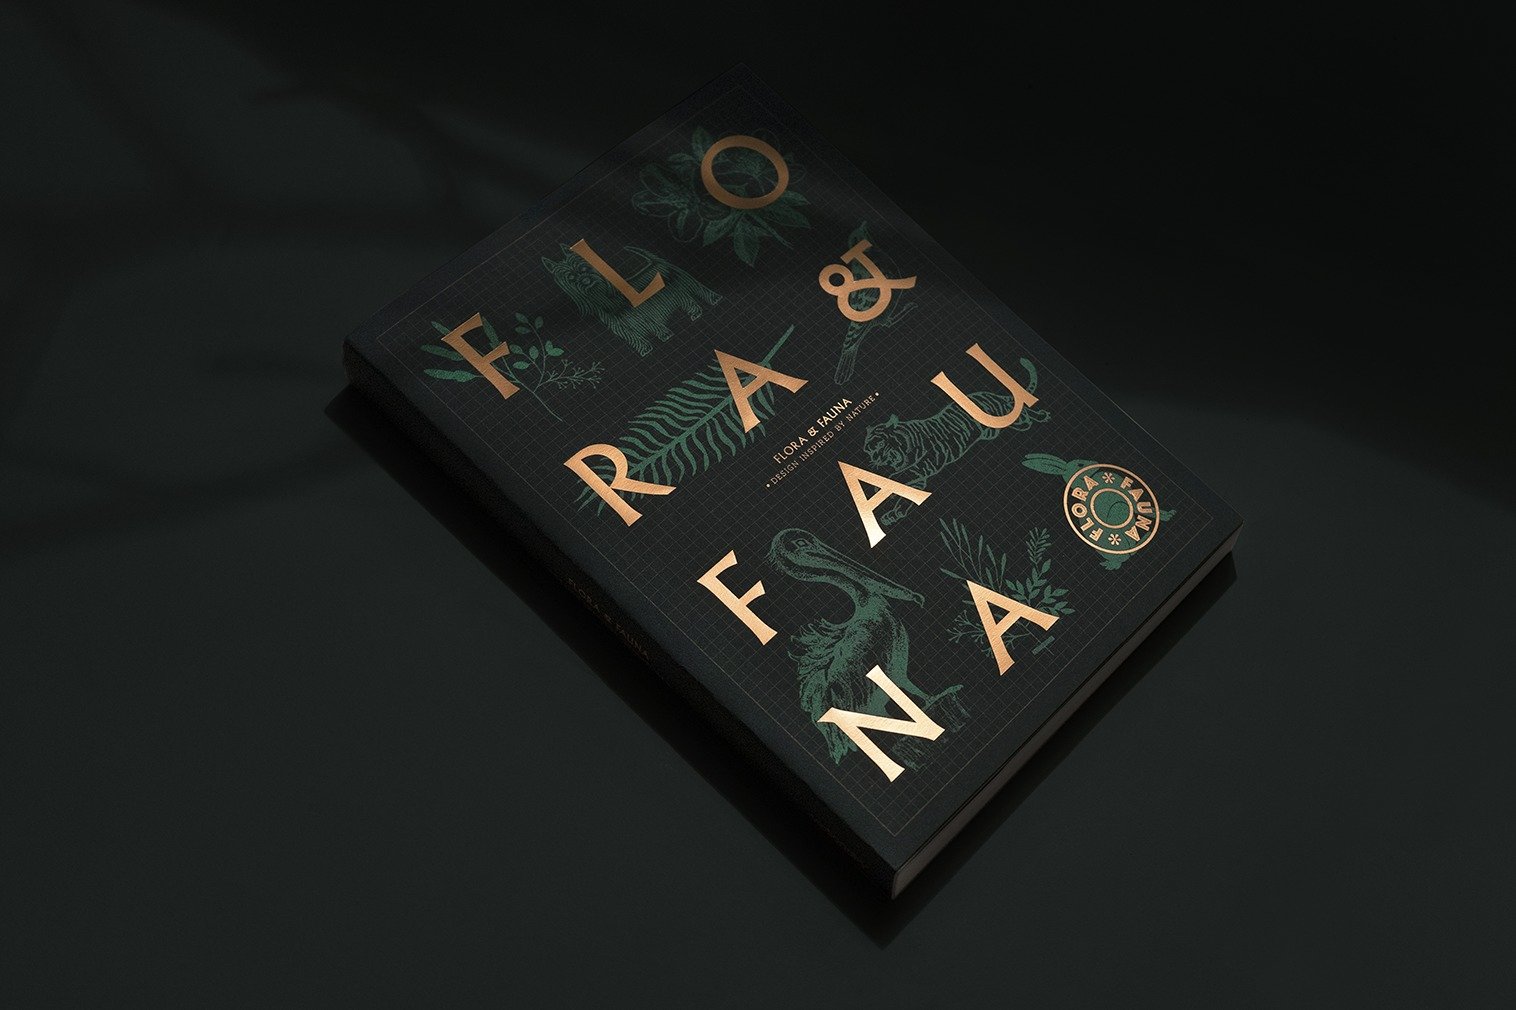 Flora Fauna Published by Victionary